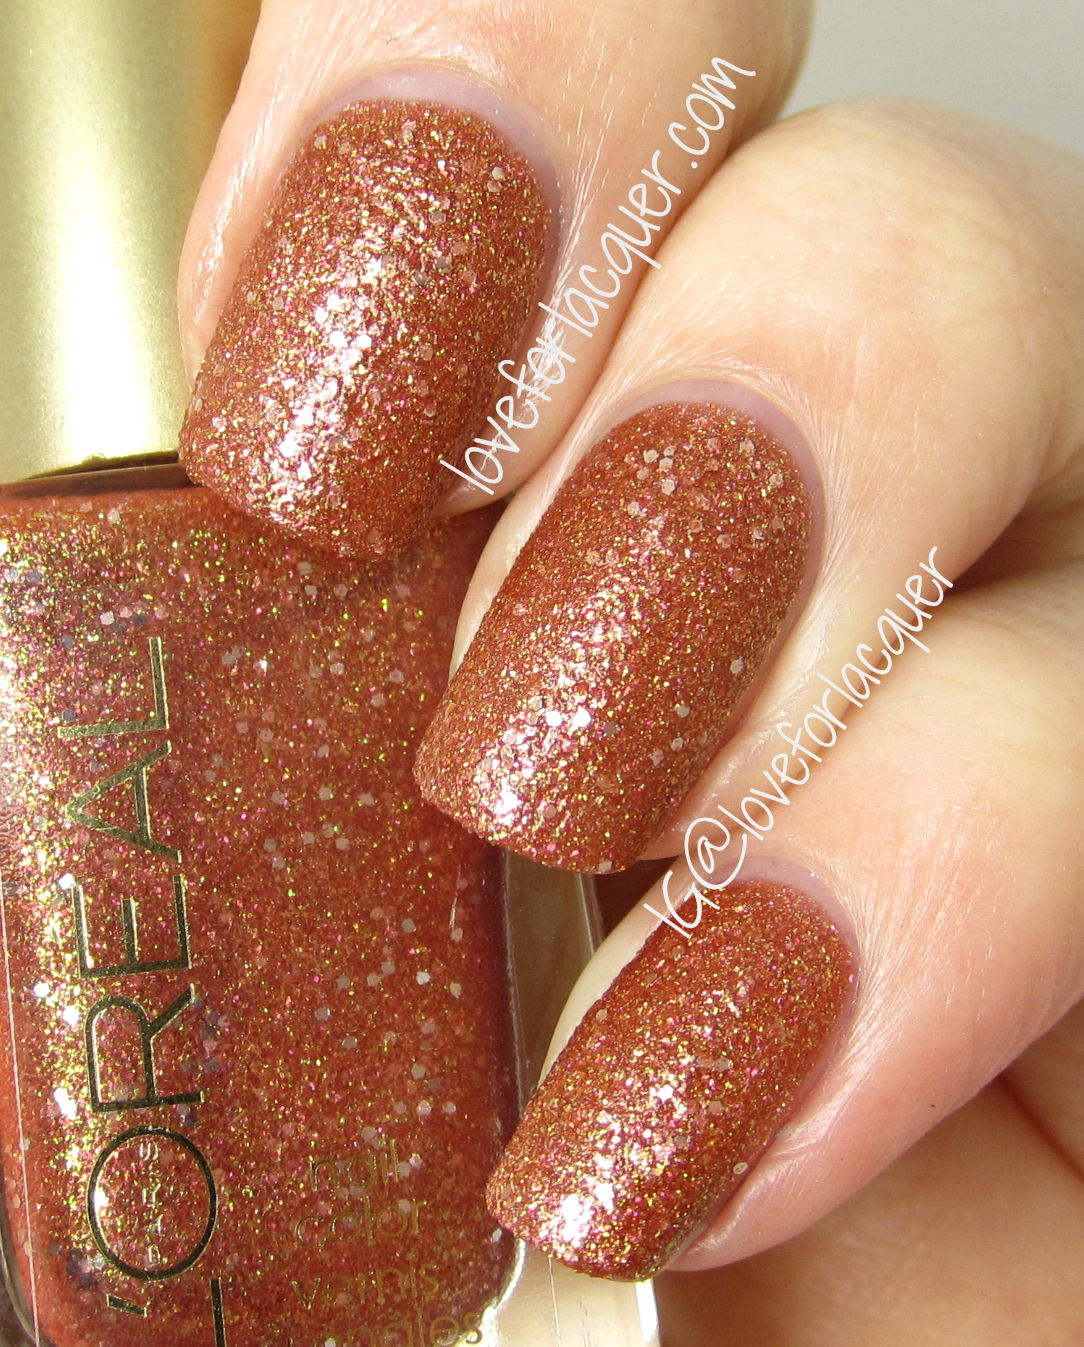 L'Oreal Gold Dust Colour Riche Nail Lacquer Swatches ...